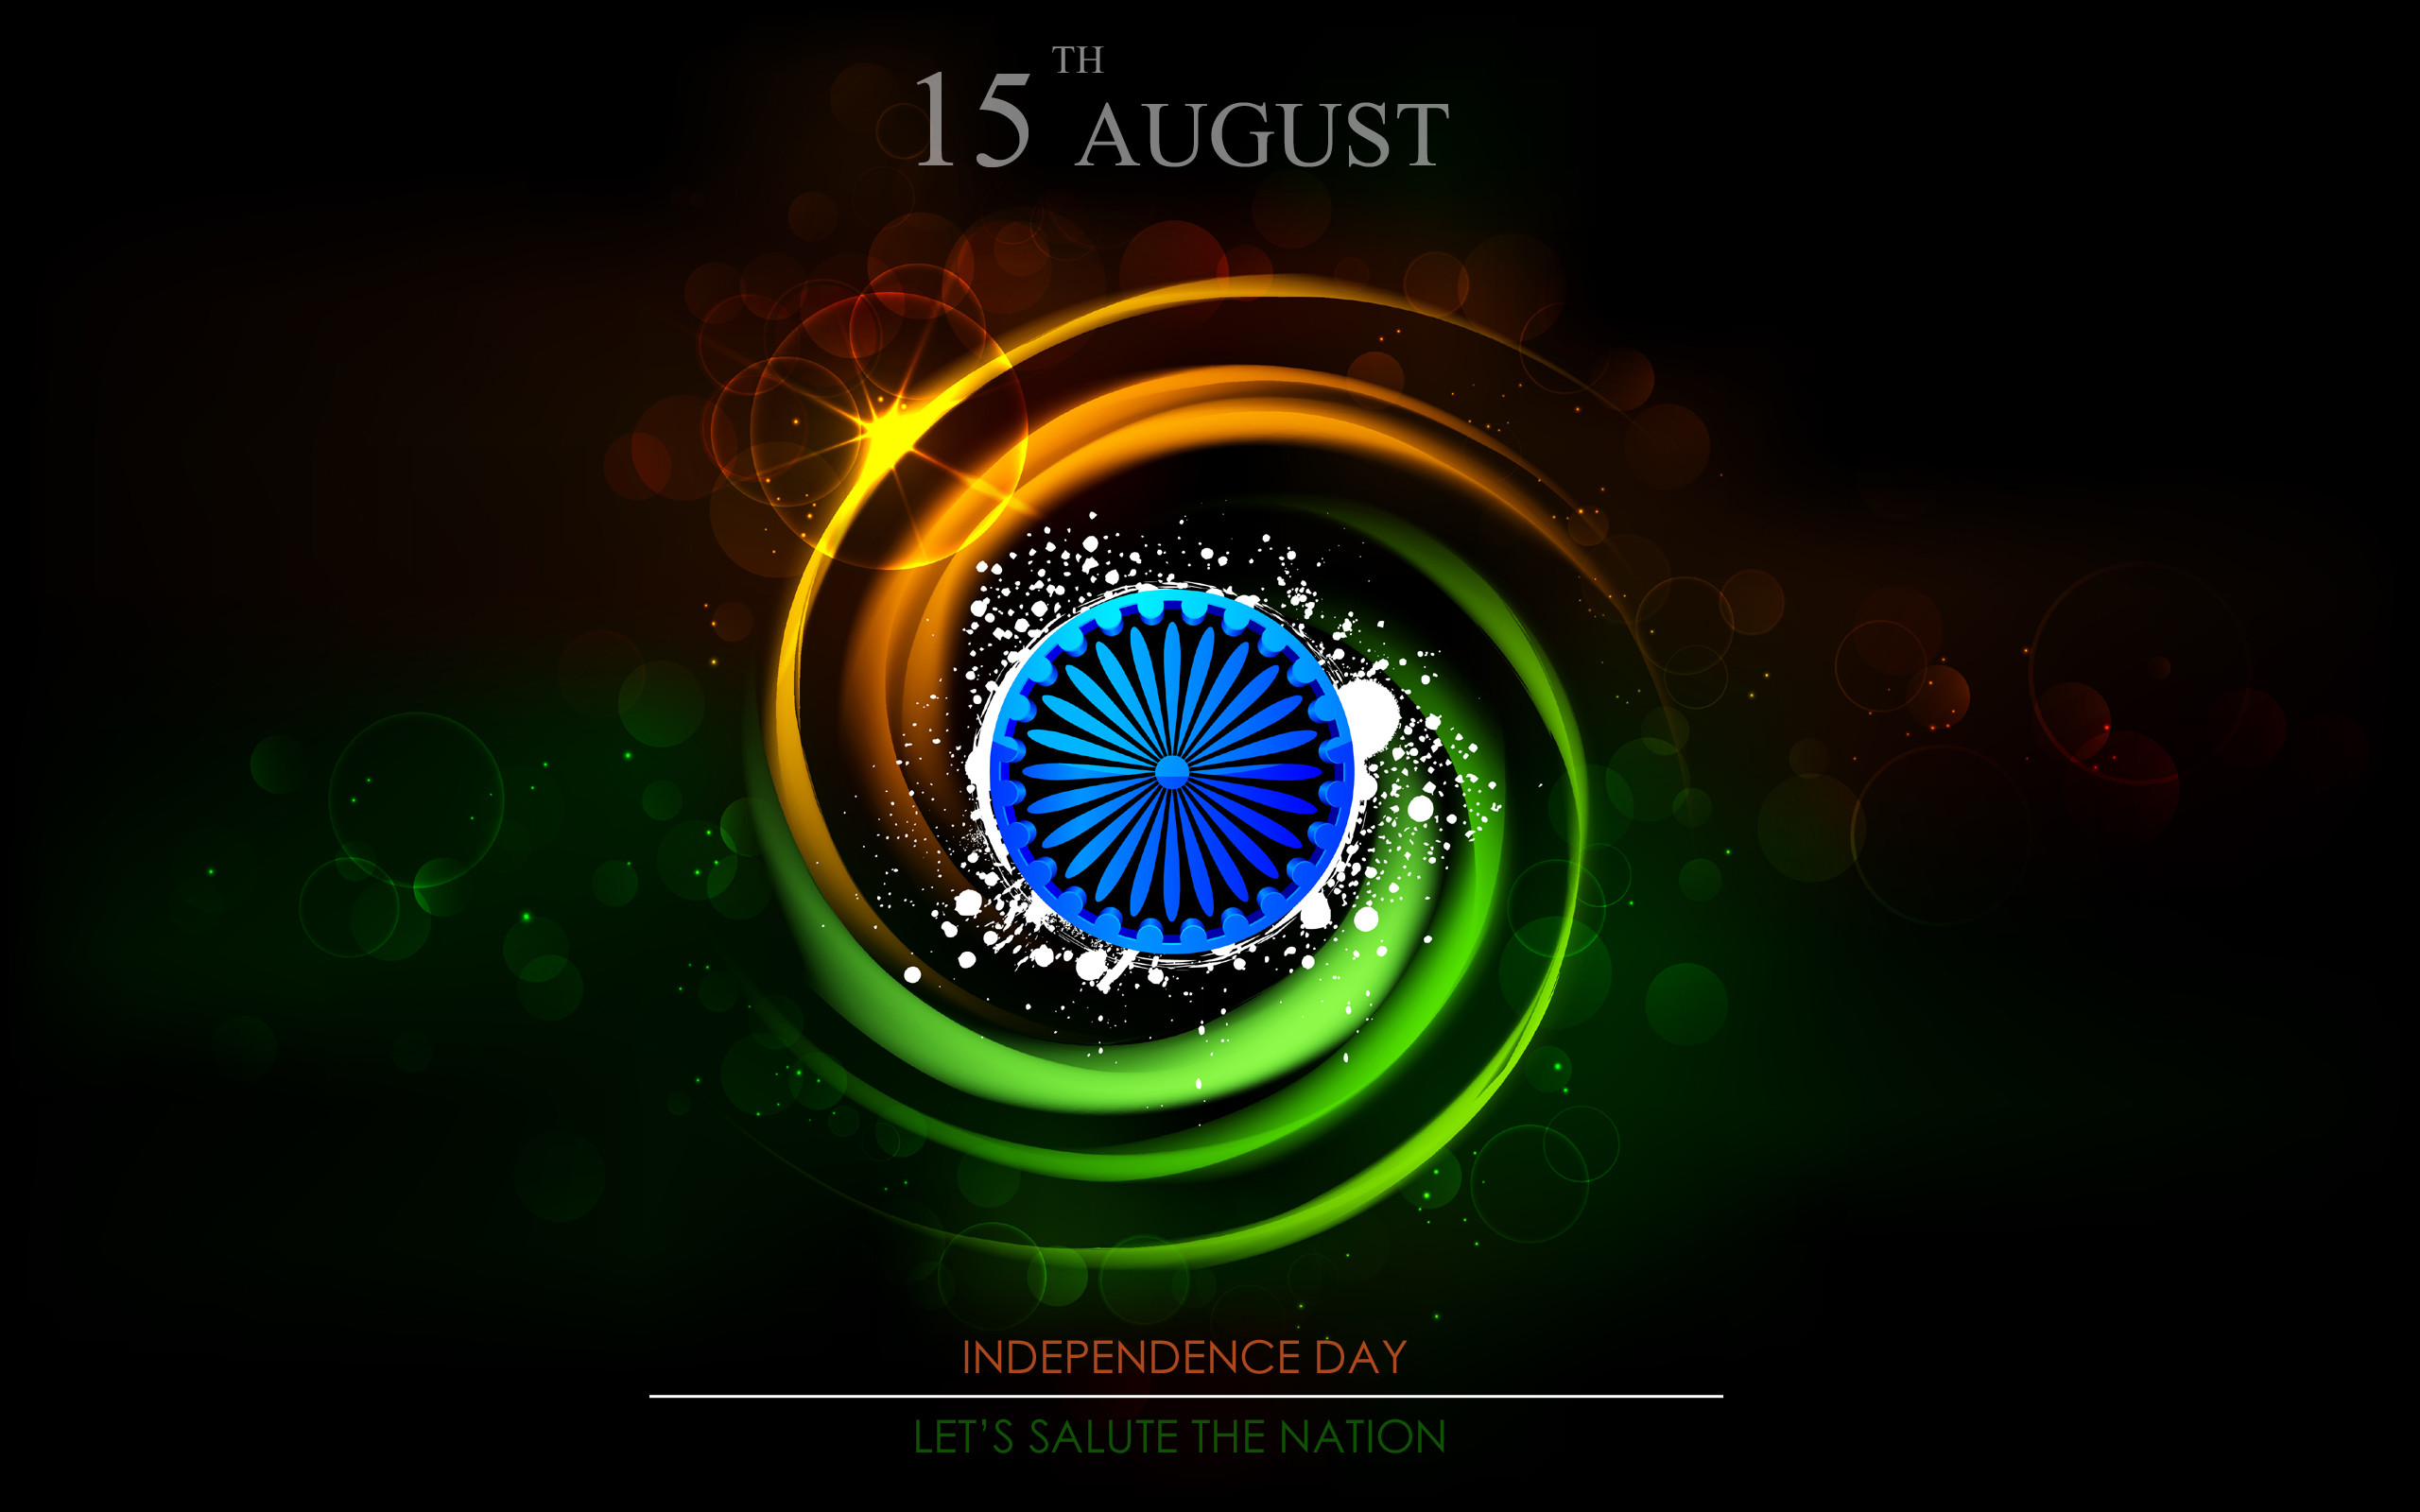 indian independence day wallpaper free download,fractal art,graphic design,circle,organism,graphics